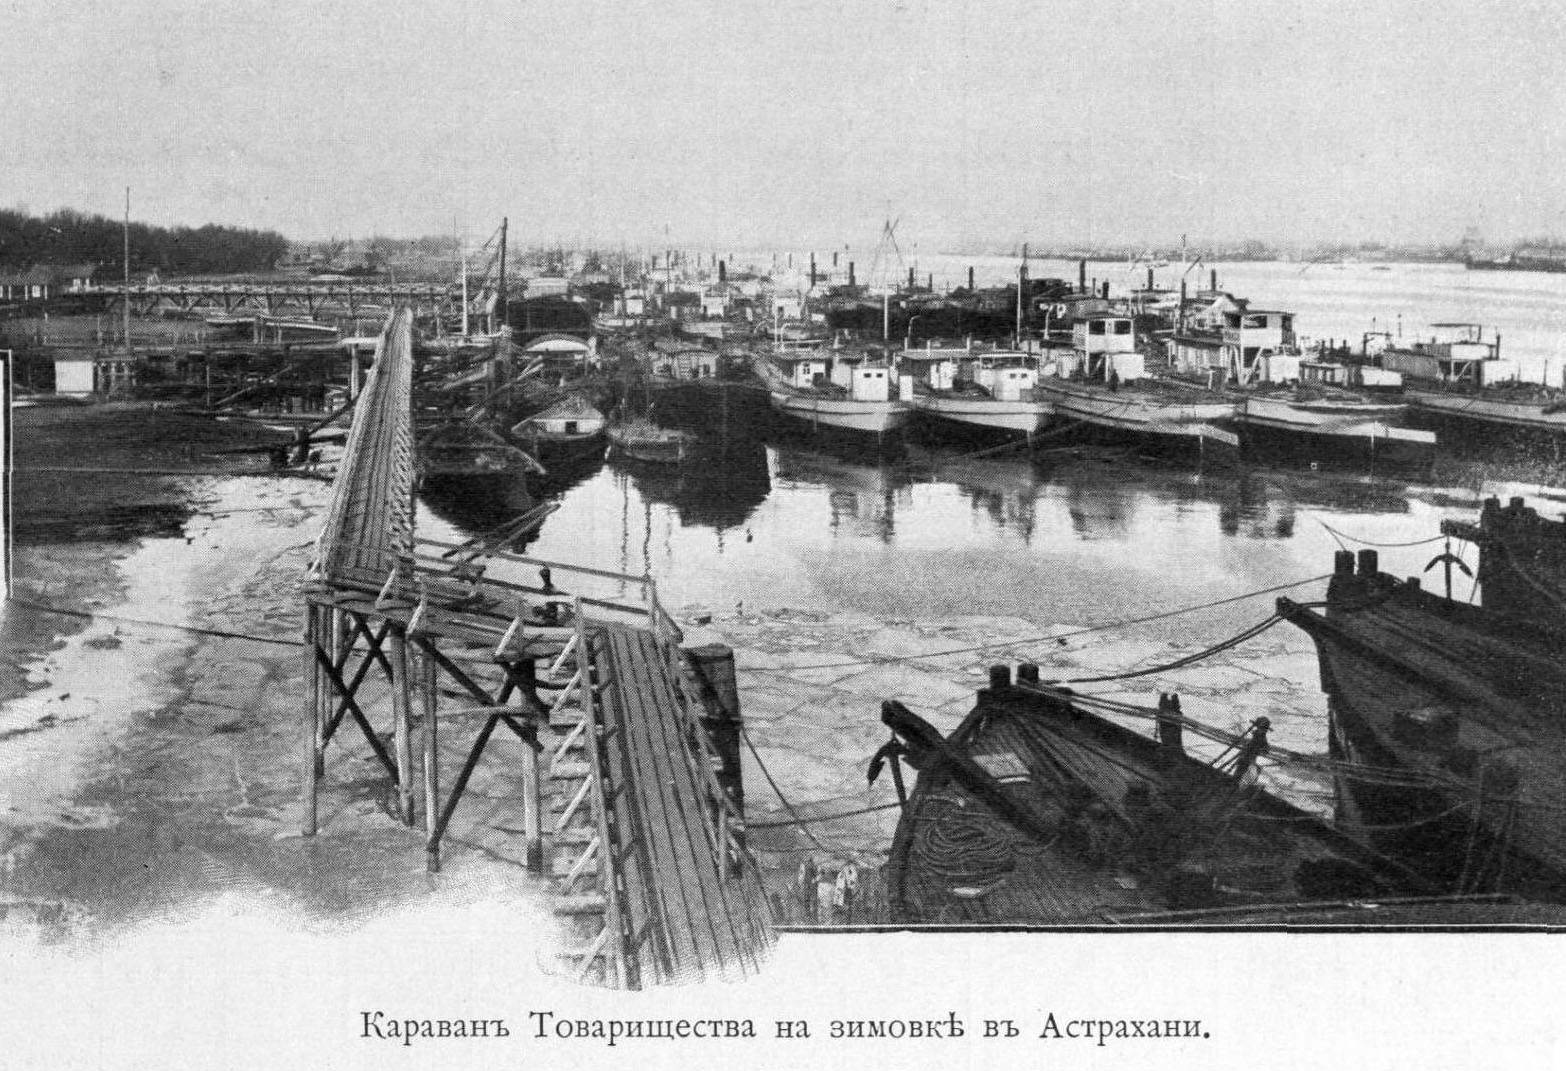 The navigation period was brief from May to October in the inner Volga. At Astrakhan the cargo fleet stands still and waits for the spring winds.